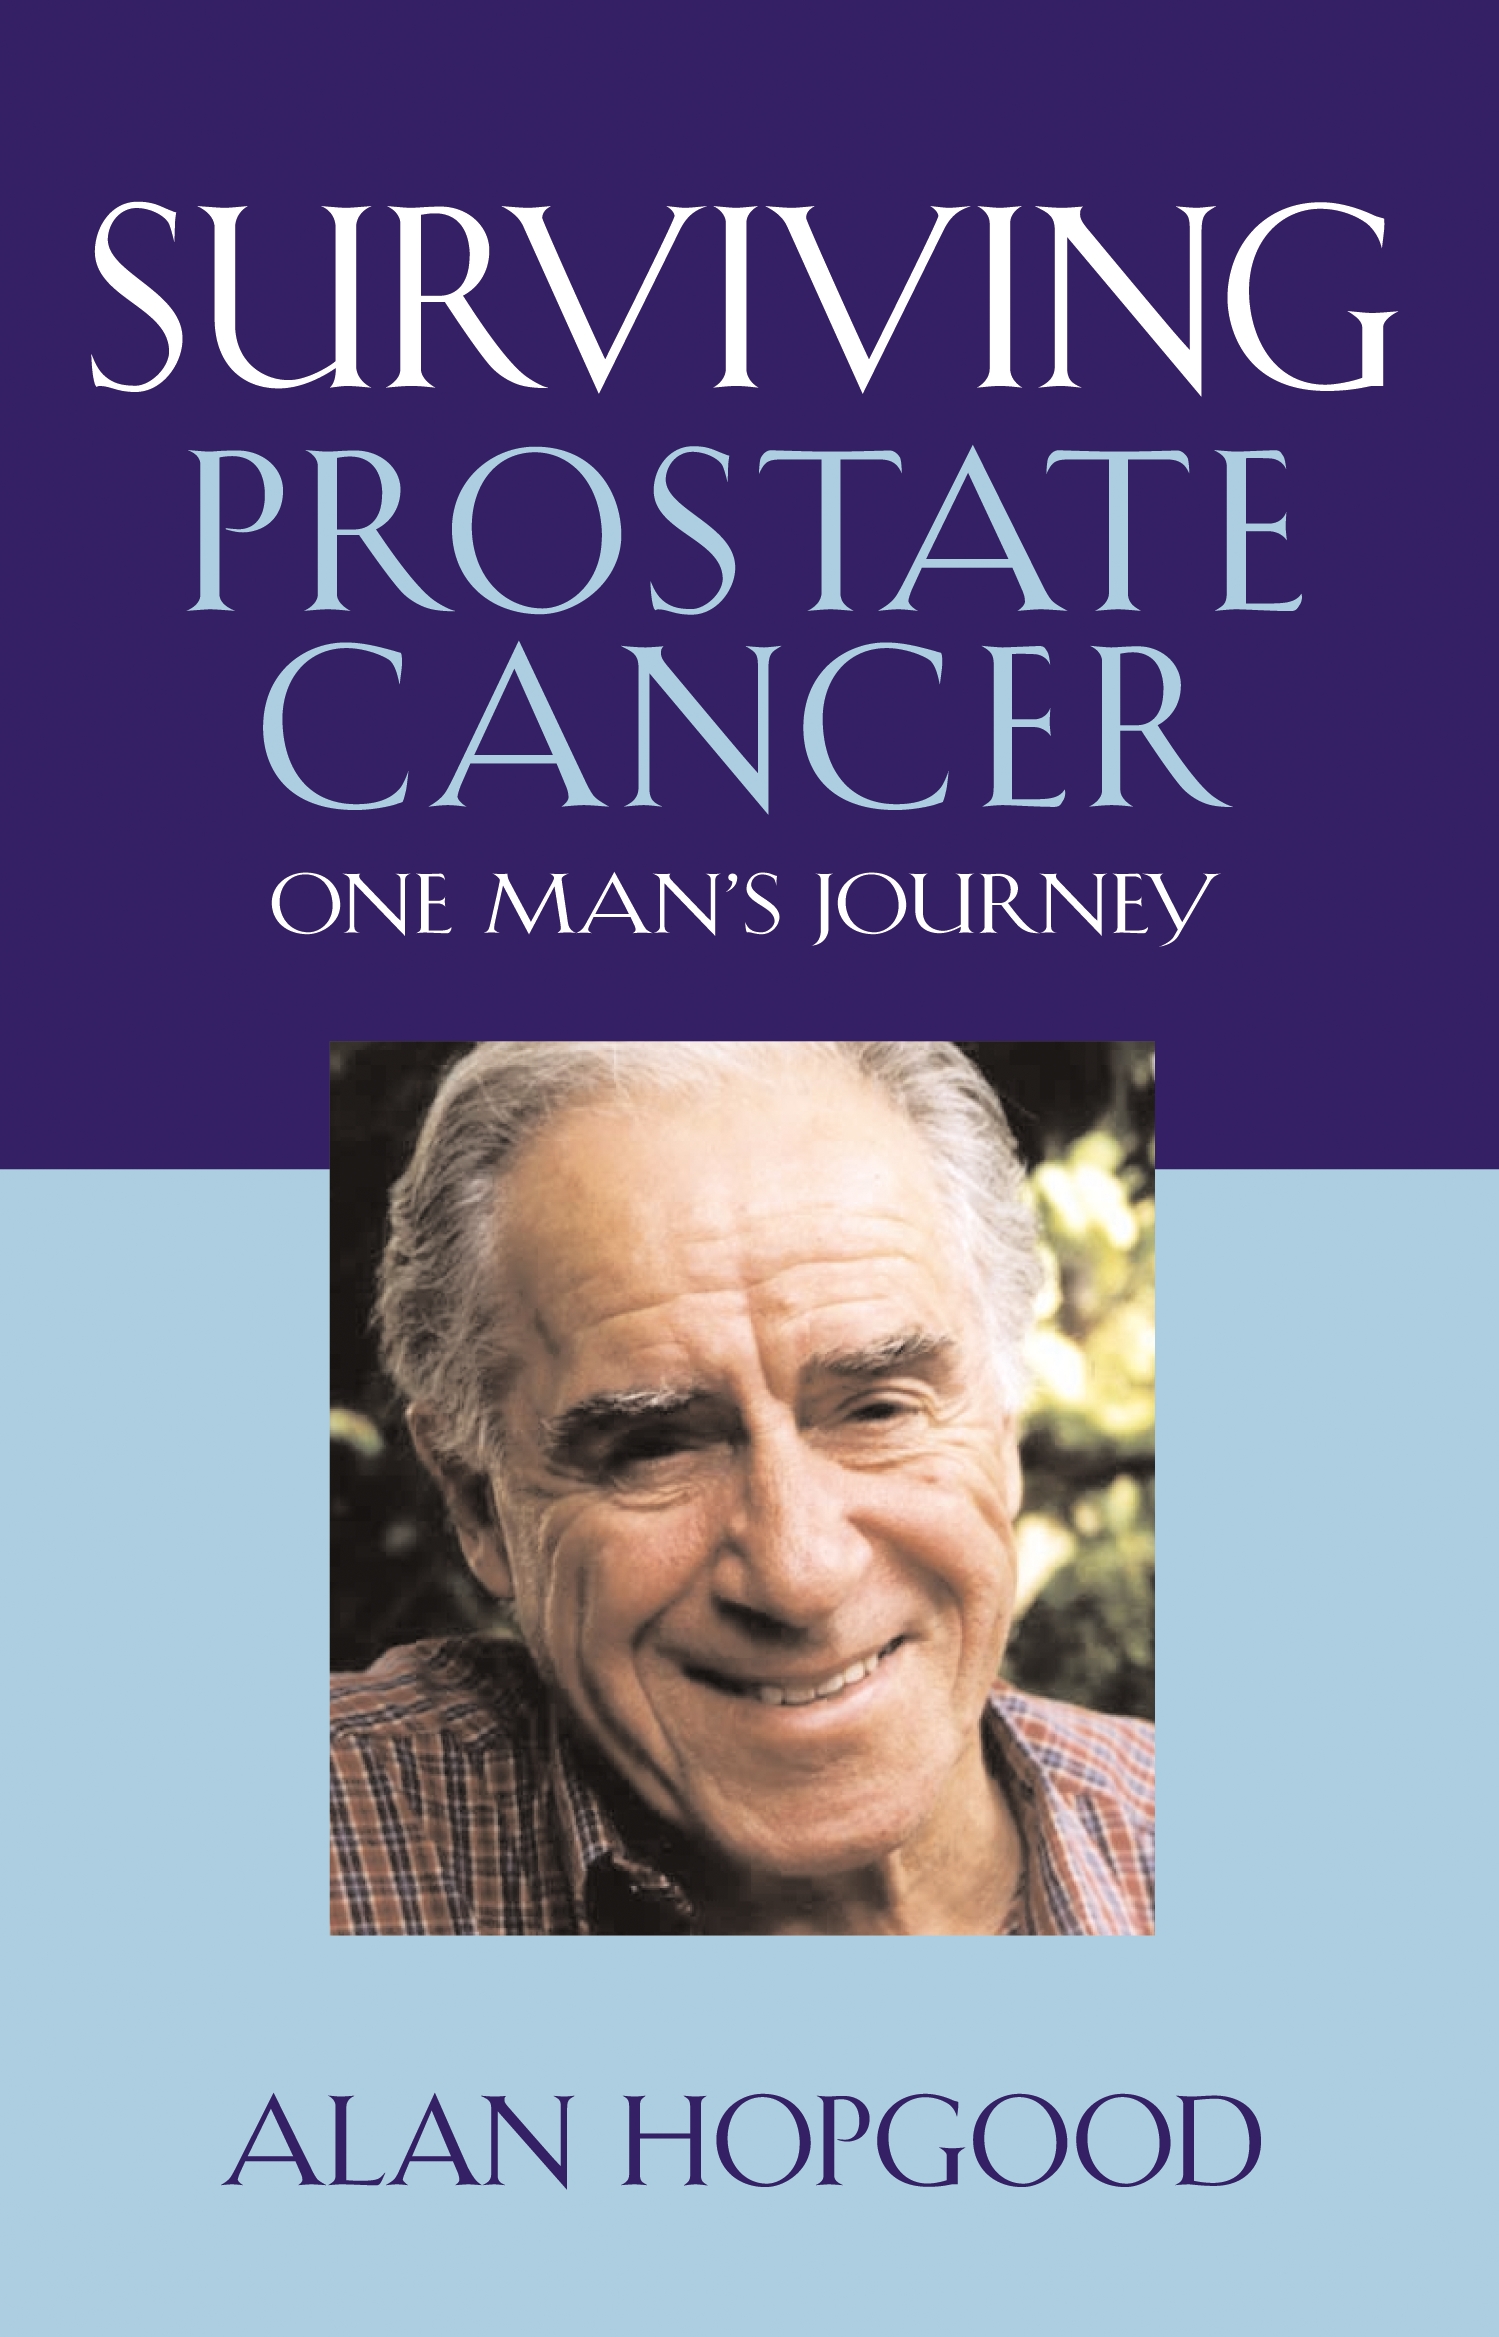 prostate cancer treatment scholarly articles